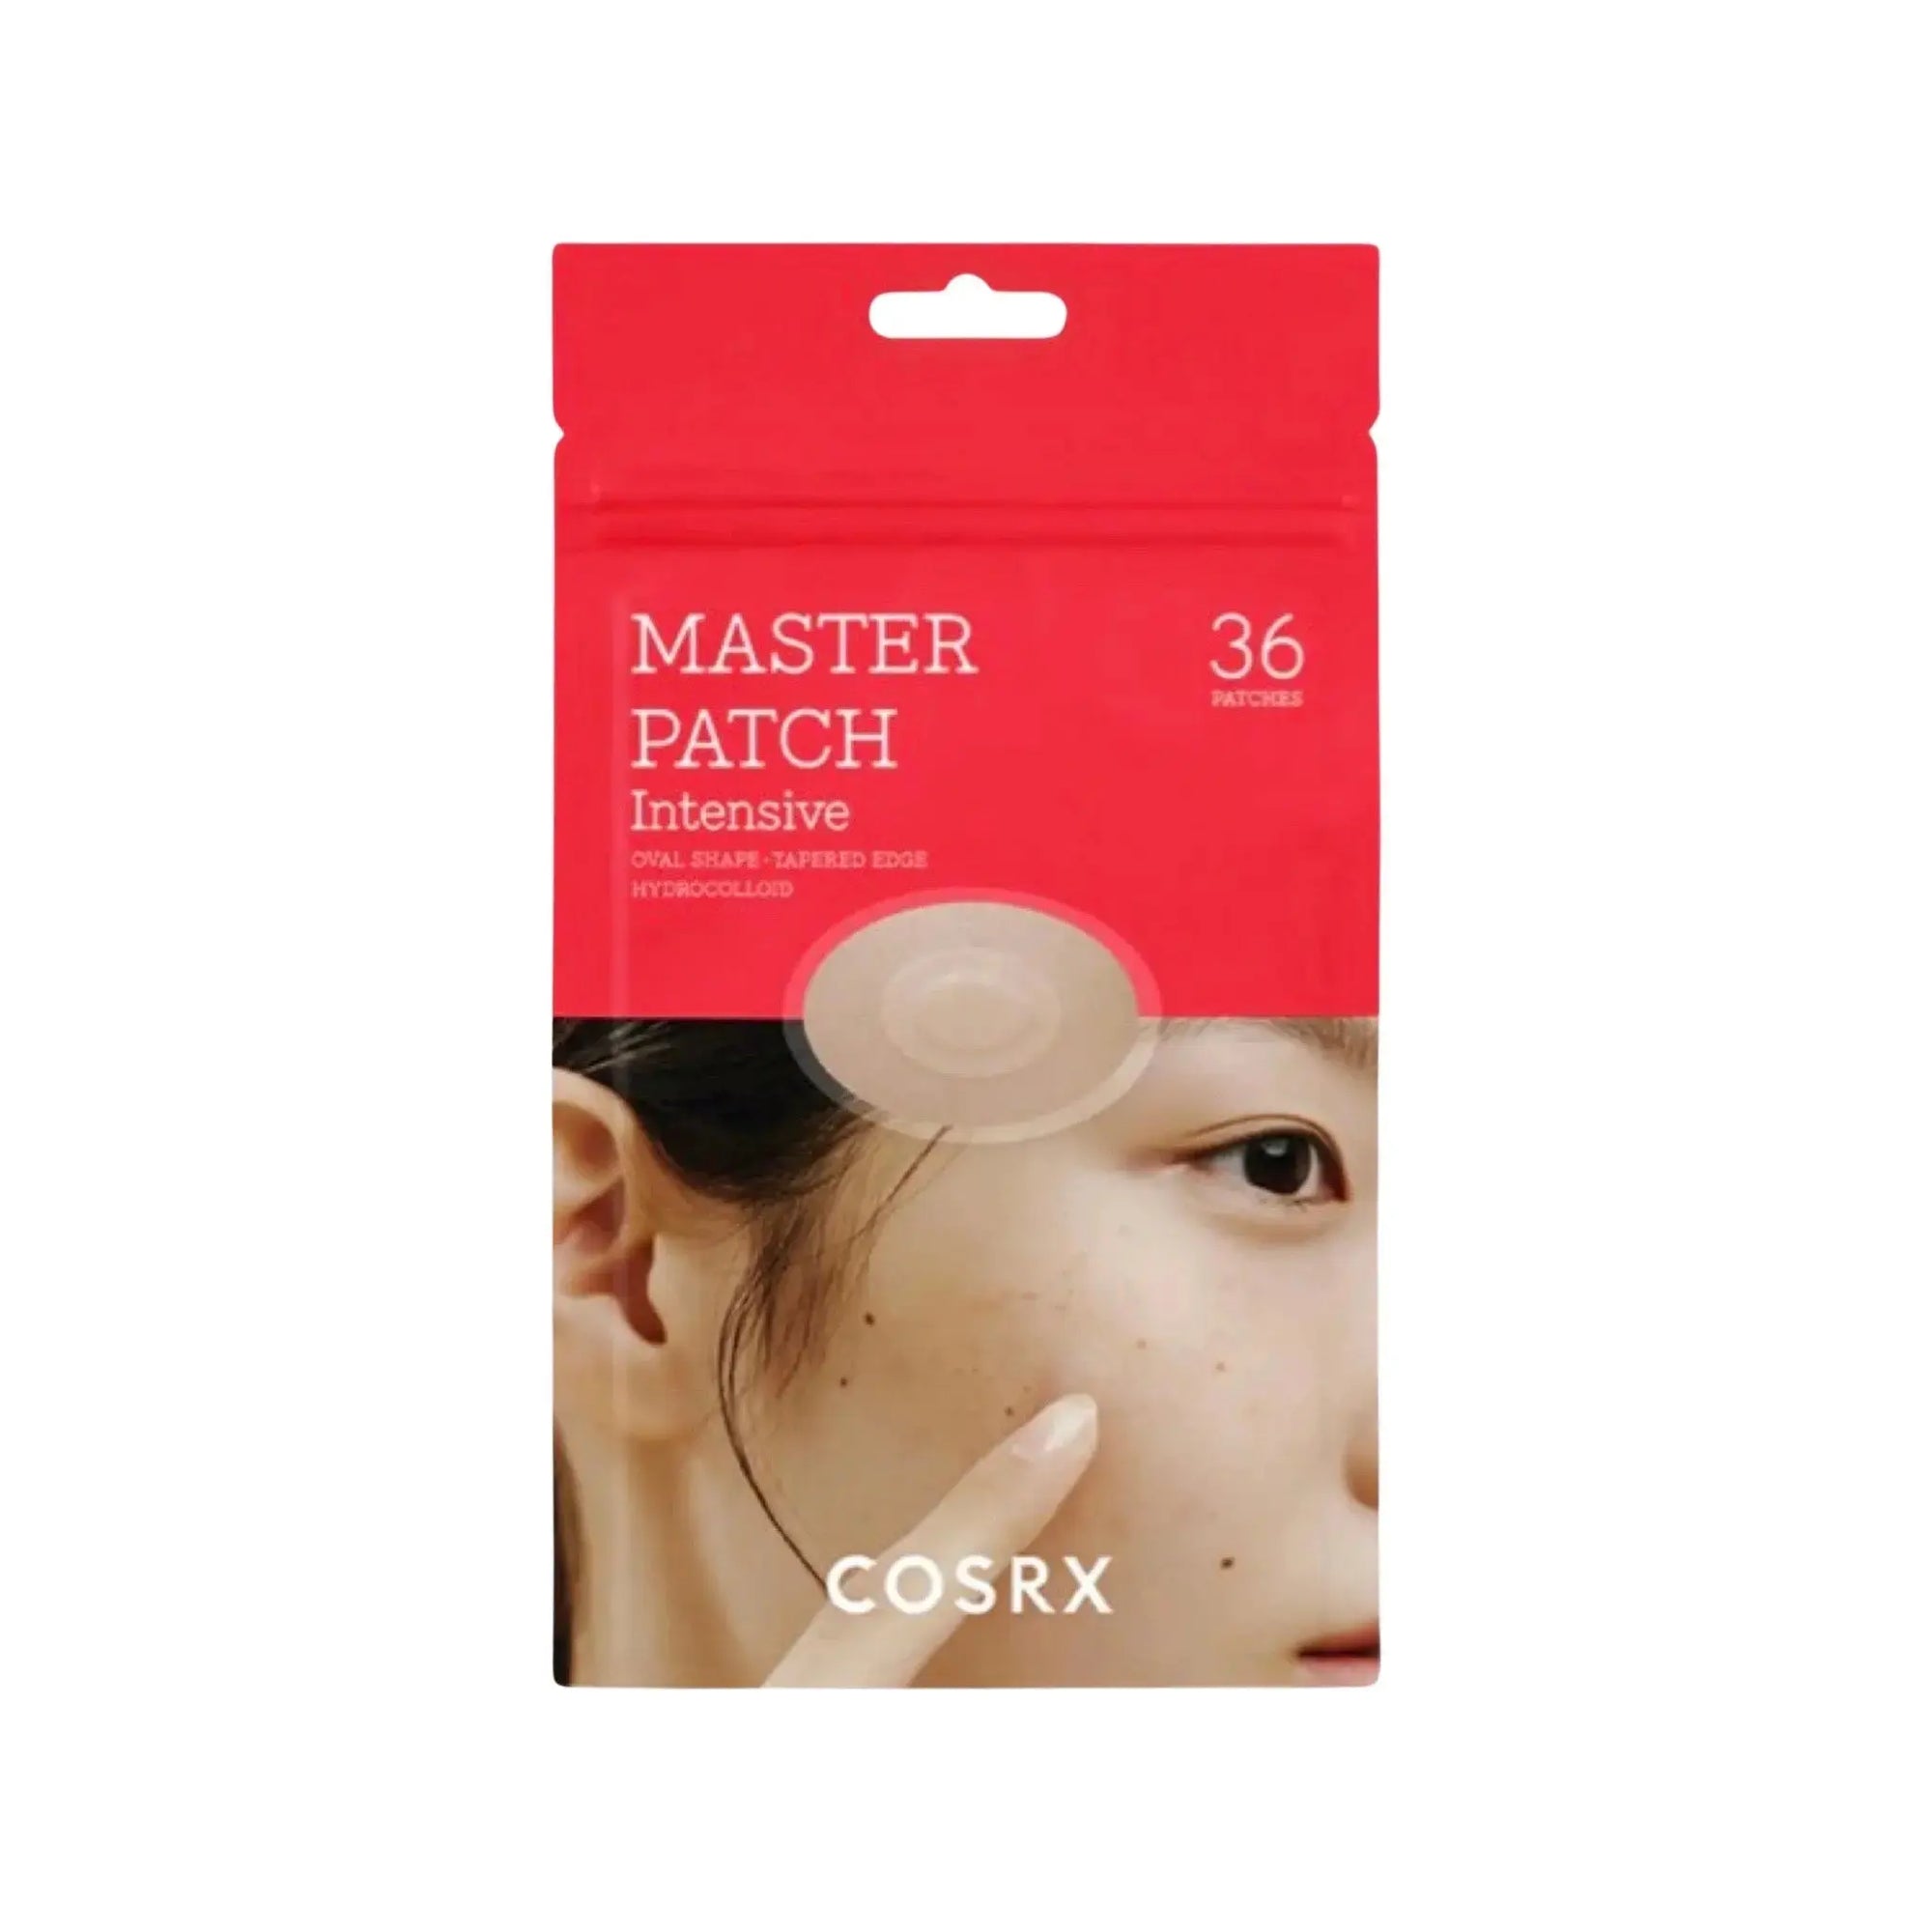 COSRX - Master Patch Intensive (36 patches) (Exp. 2025-09-07) - WanderShop